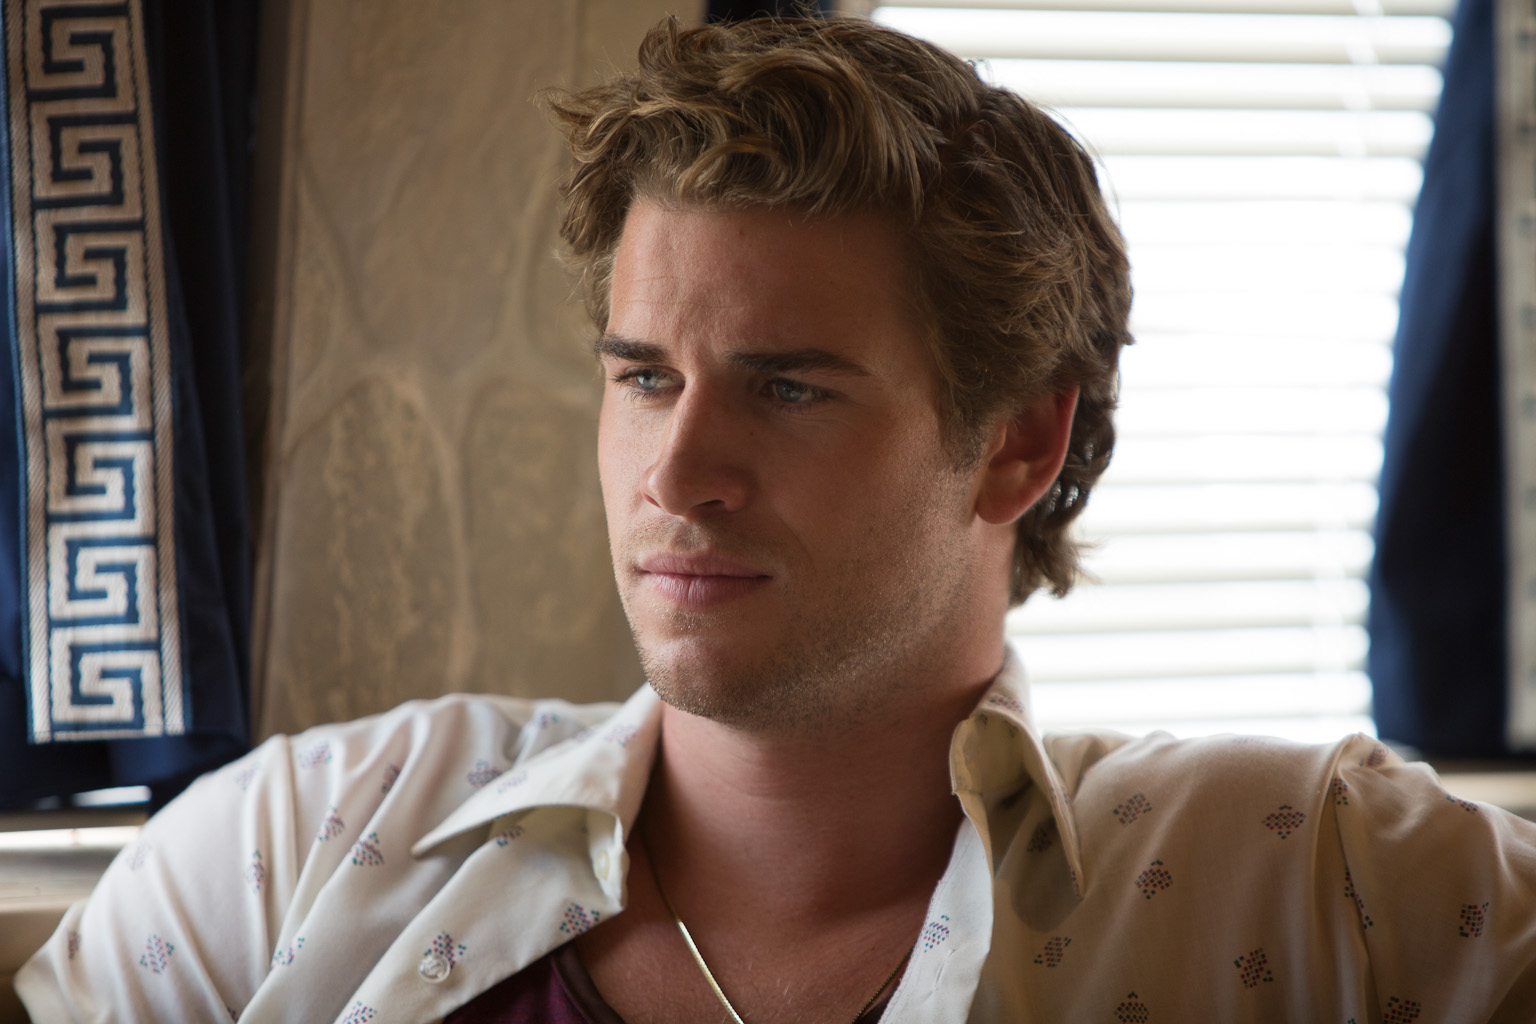 Liam Hemsworth stars as Chris in Lionsgate's Empire State (2013)